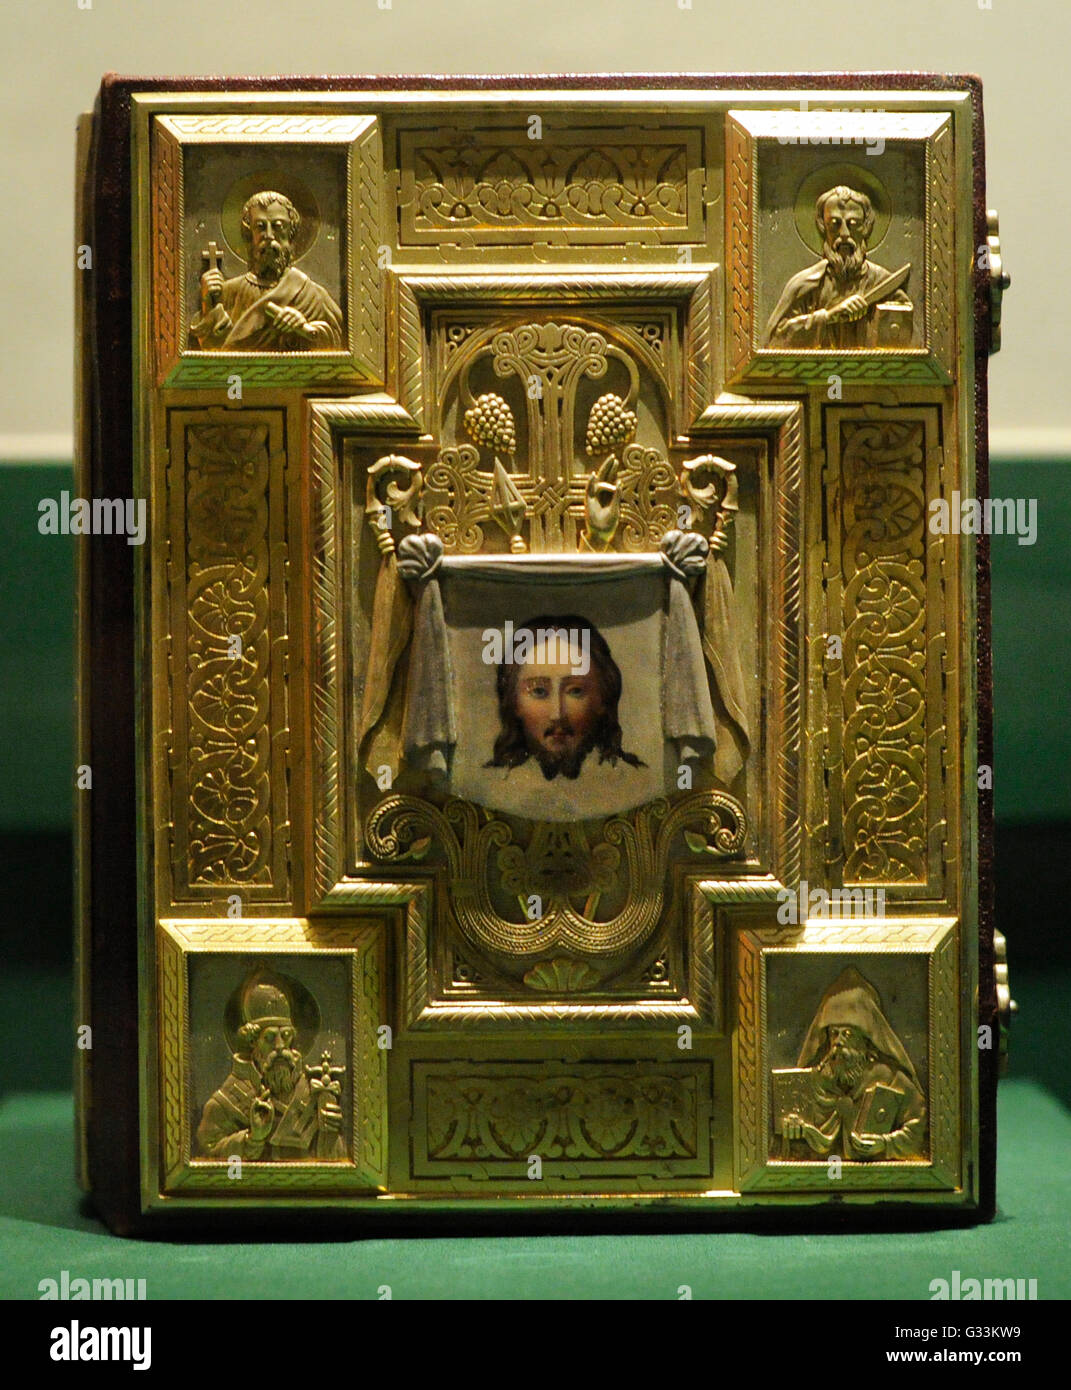 The Four Gospels. Parchment, leather, wood panel, paints, gold Amasia. Middle 17th century. By Lazaros. Frame: silver, gilding, enamel. St. Petersburg. Late 19th Century. The State Hermitage Museum. Saint Petersburg. Russia. Stock Photo